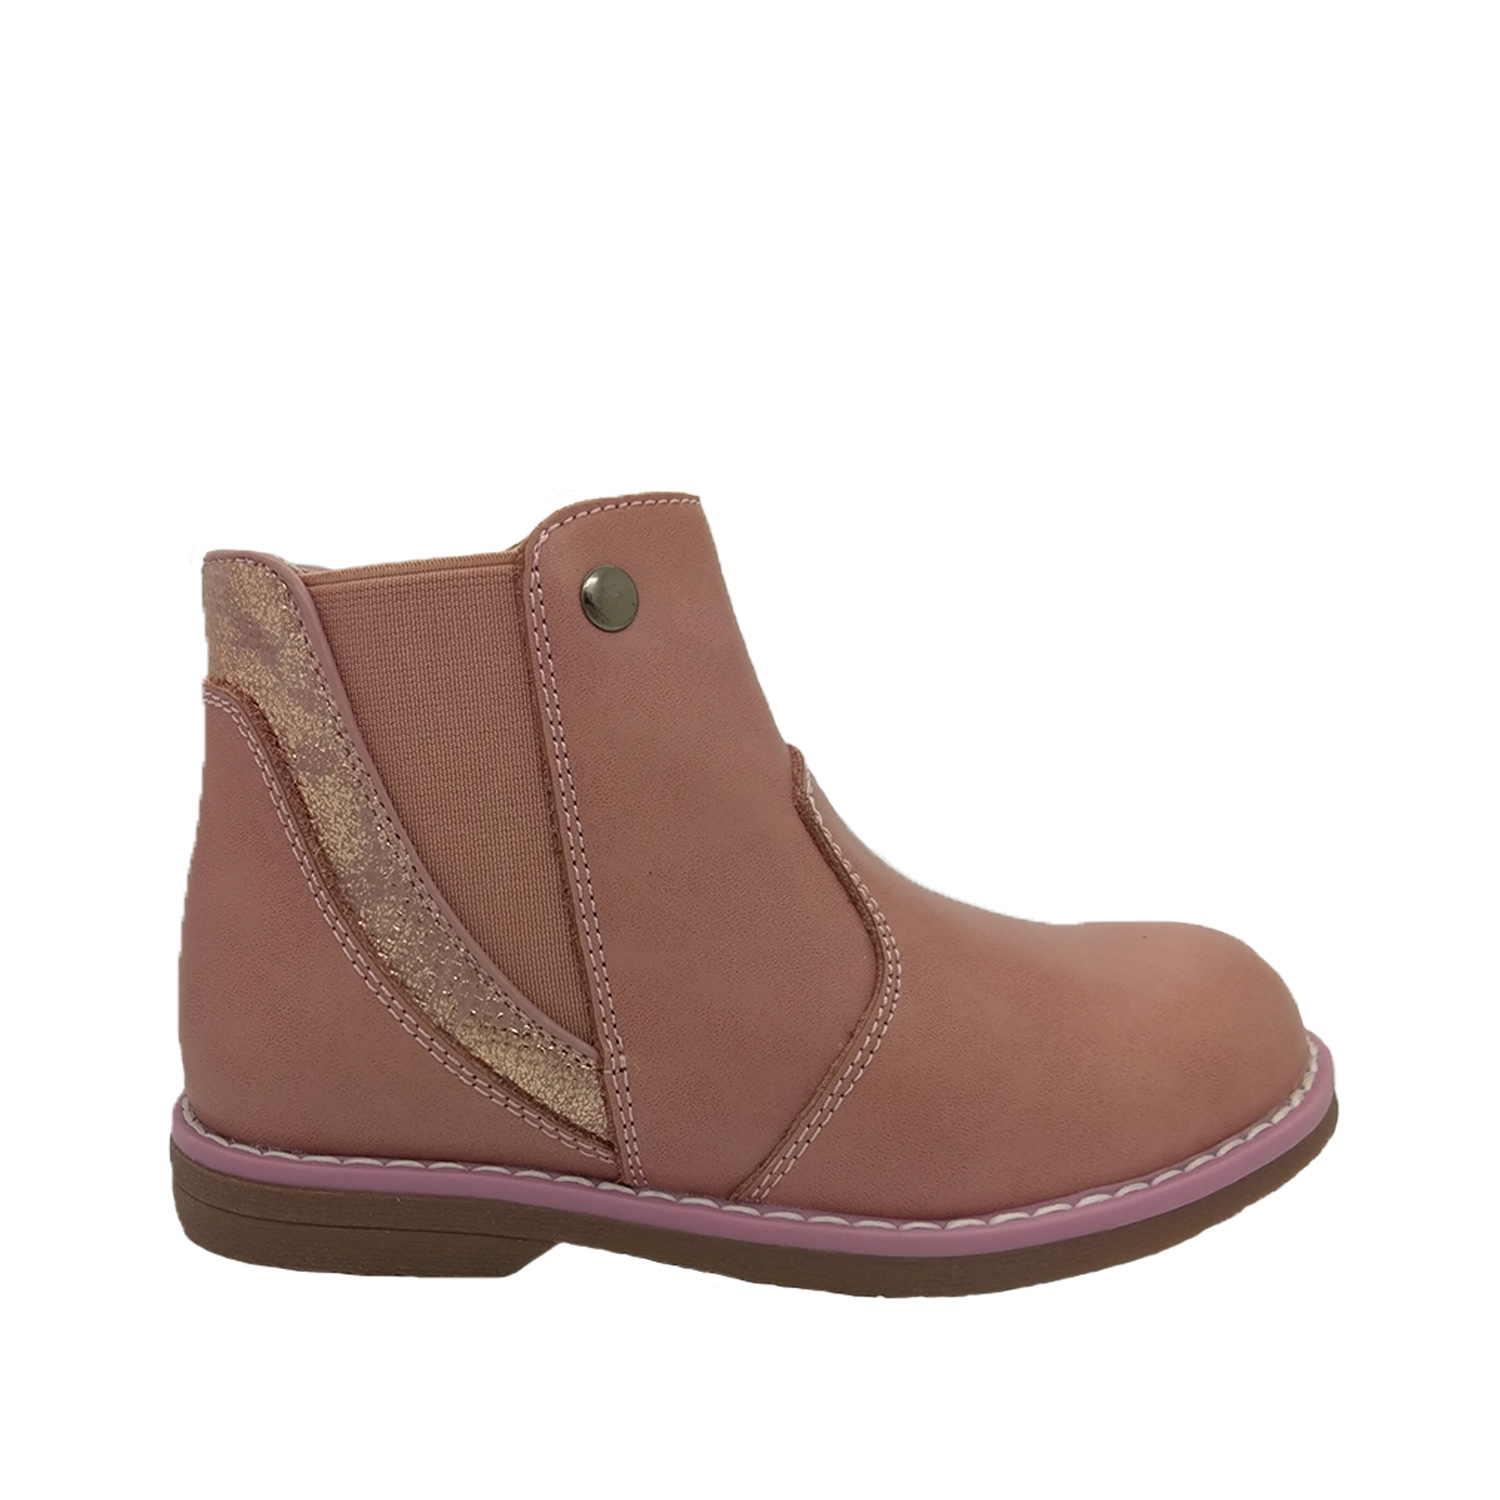 Girls Boots Miss Sachi Marley Leather 